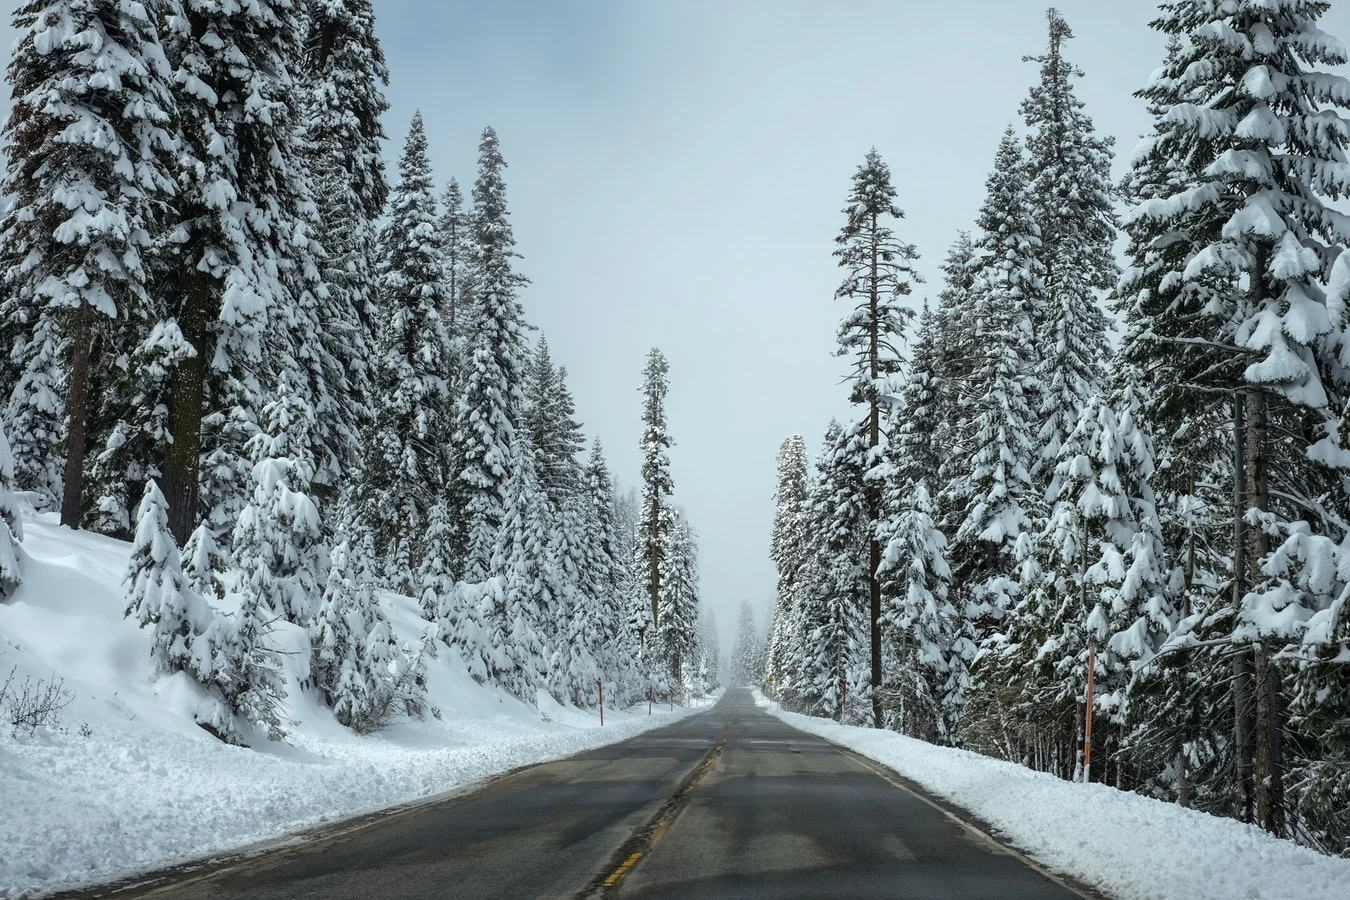 Cold temperatures improving winter roads to northern First Nations